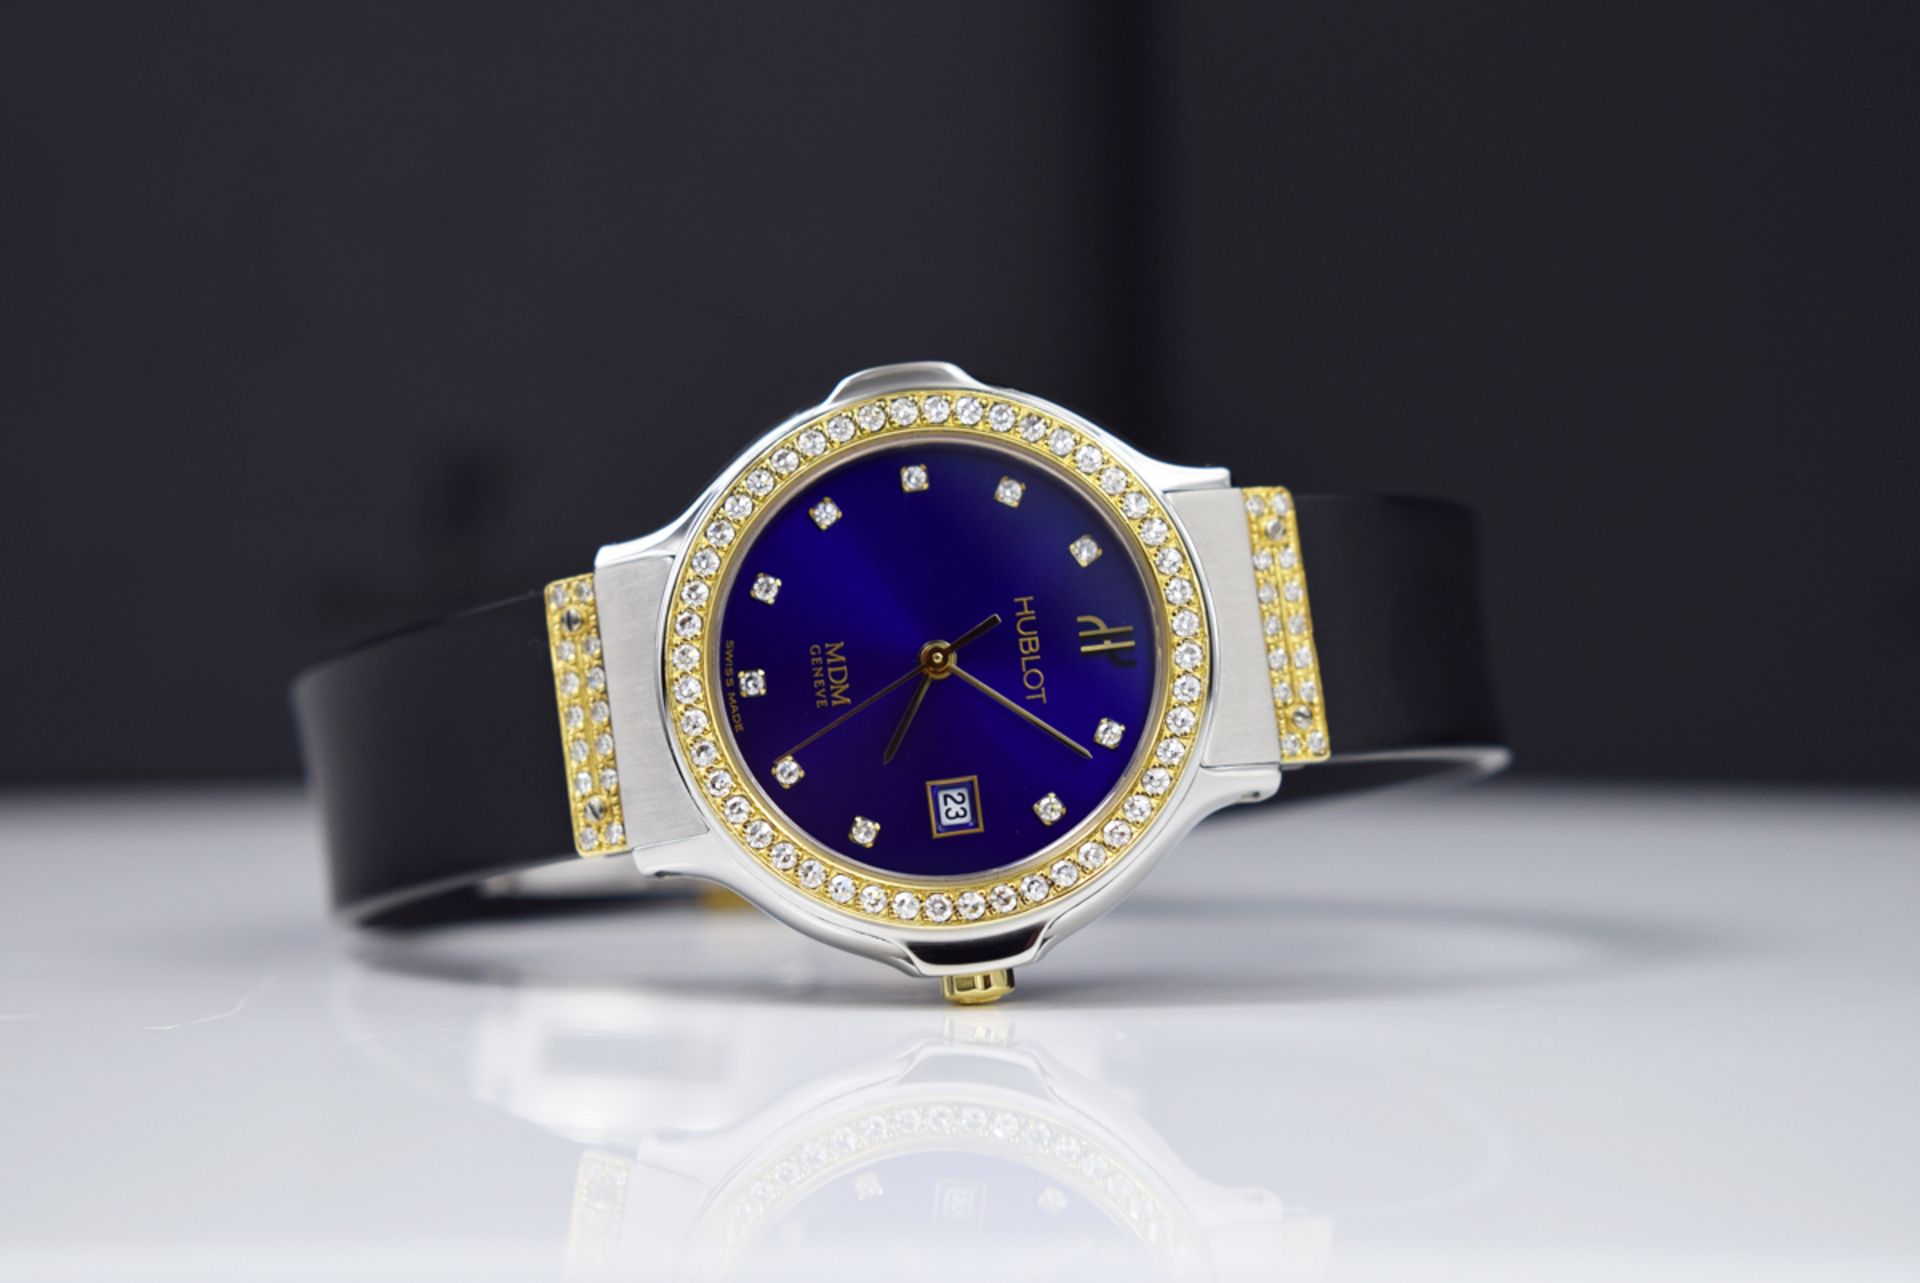 HUBLOT - 'Diamond' Lady Date - Steel and Gold! Gorgeous Blue Dial! - Image 6 of 8